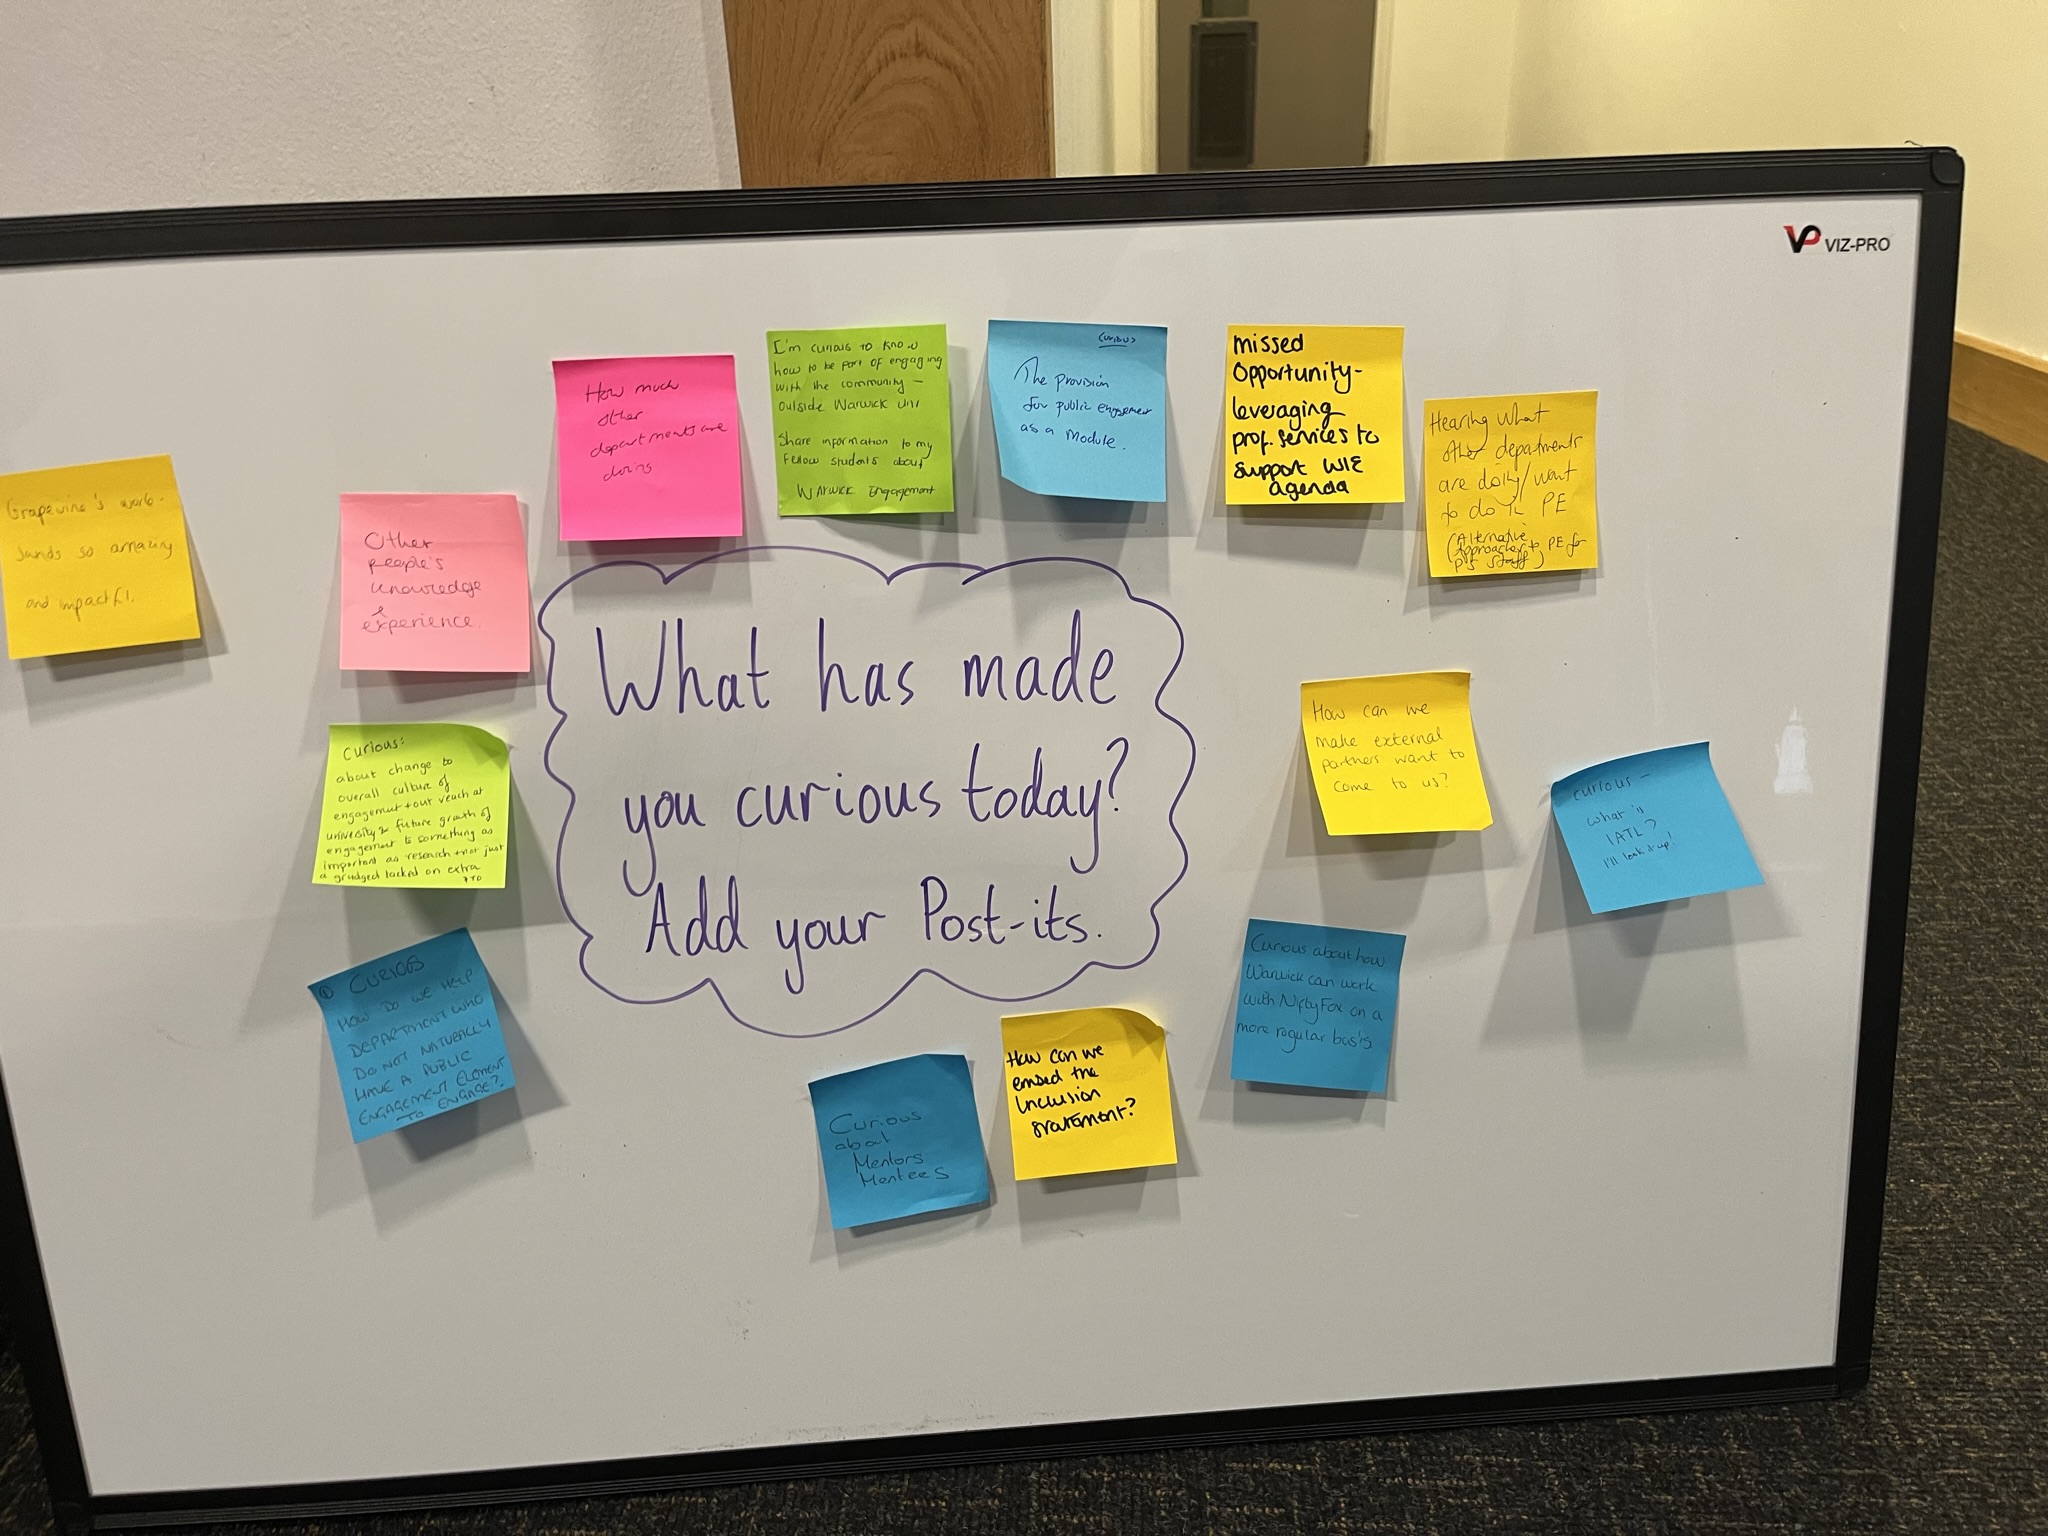 Post its on a board - transcribed below